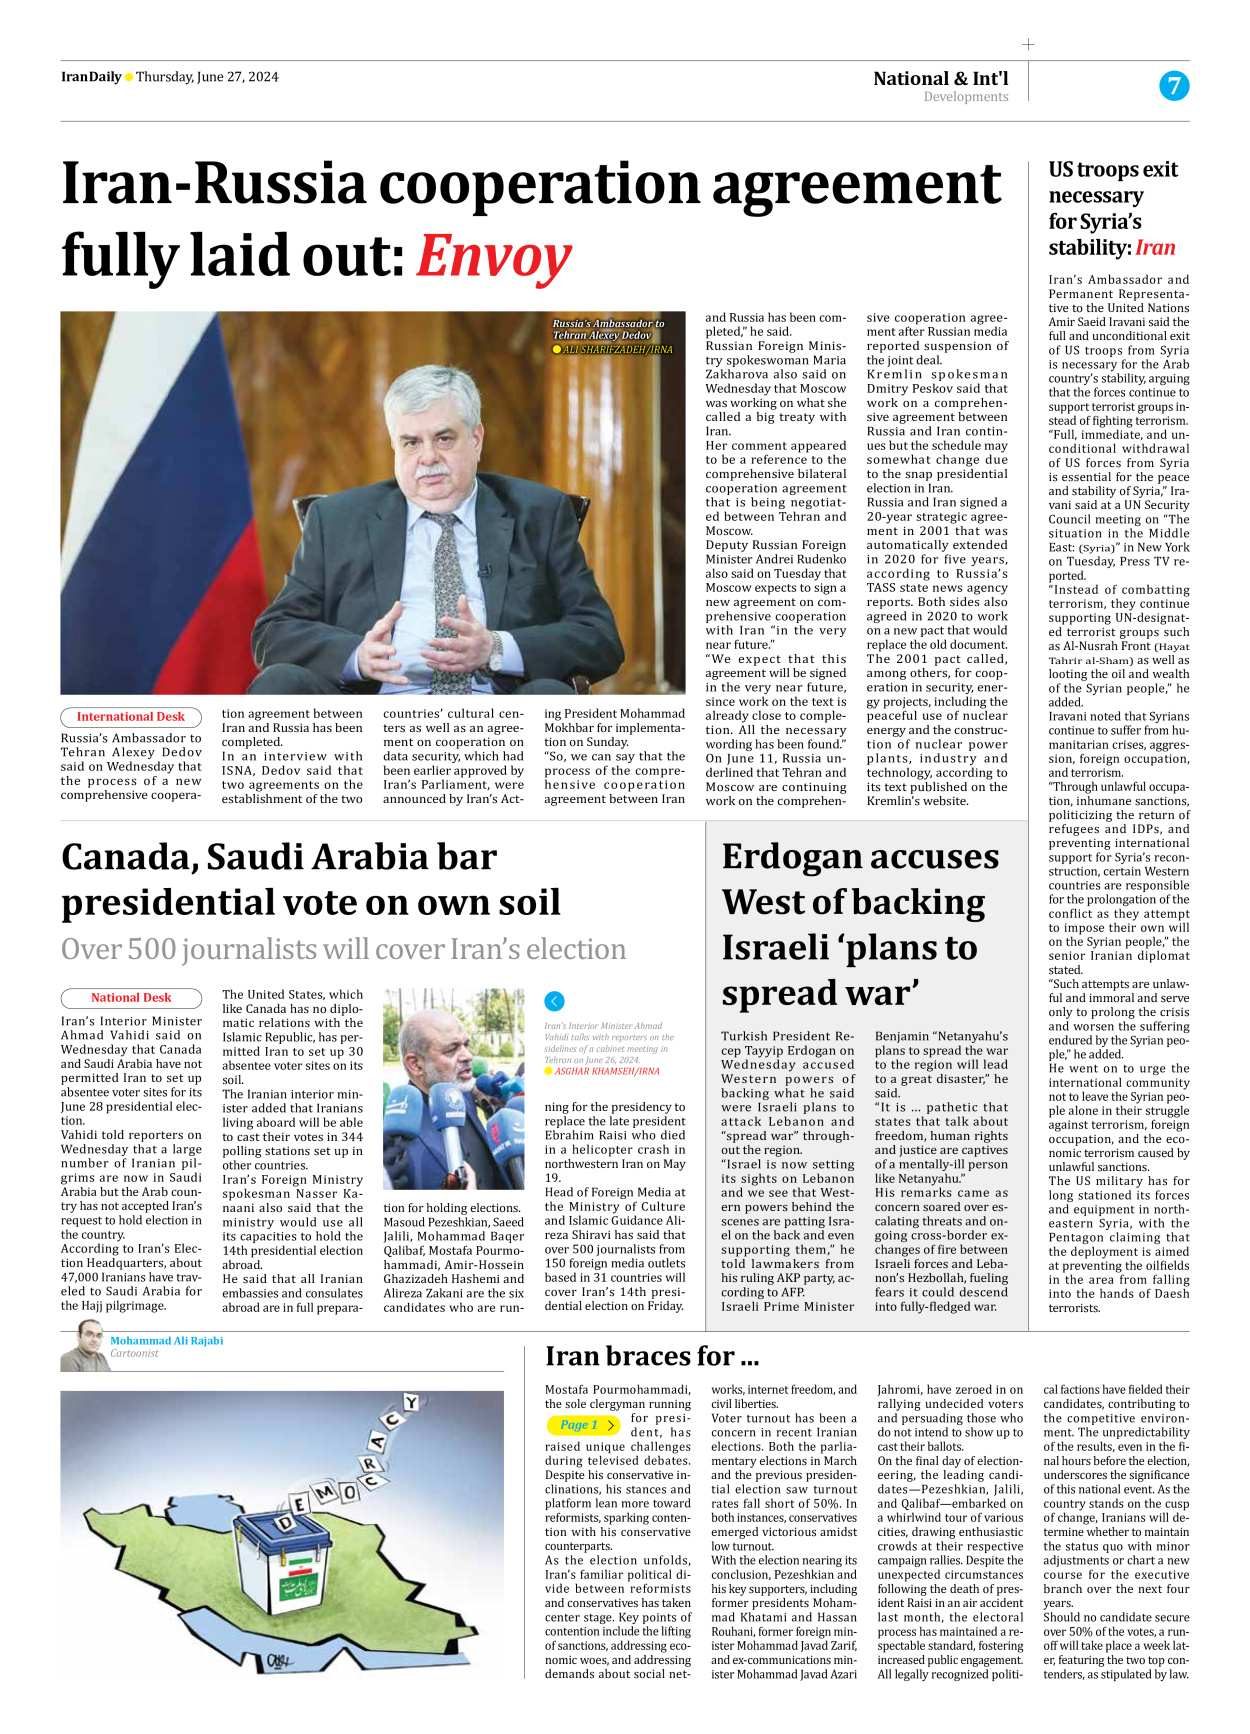 Iran Daily - Number Seven Thousand Five Hundred and Ninety - 27 June 2024 - Page 7